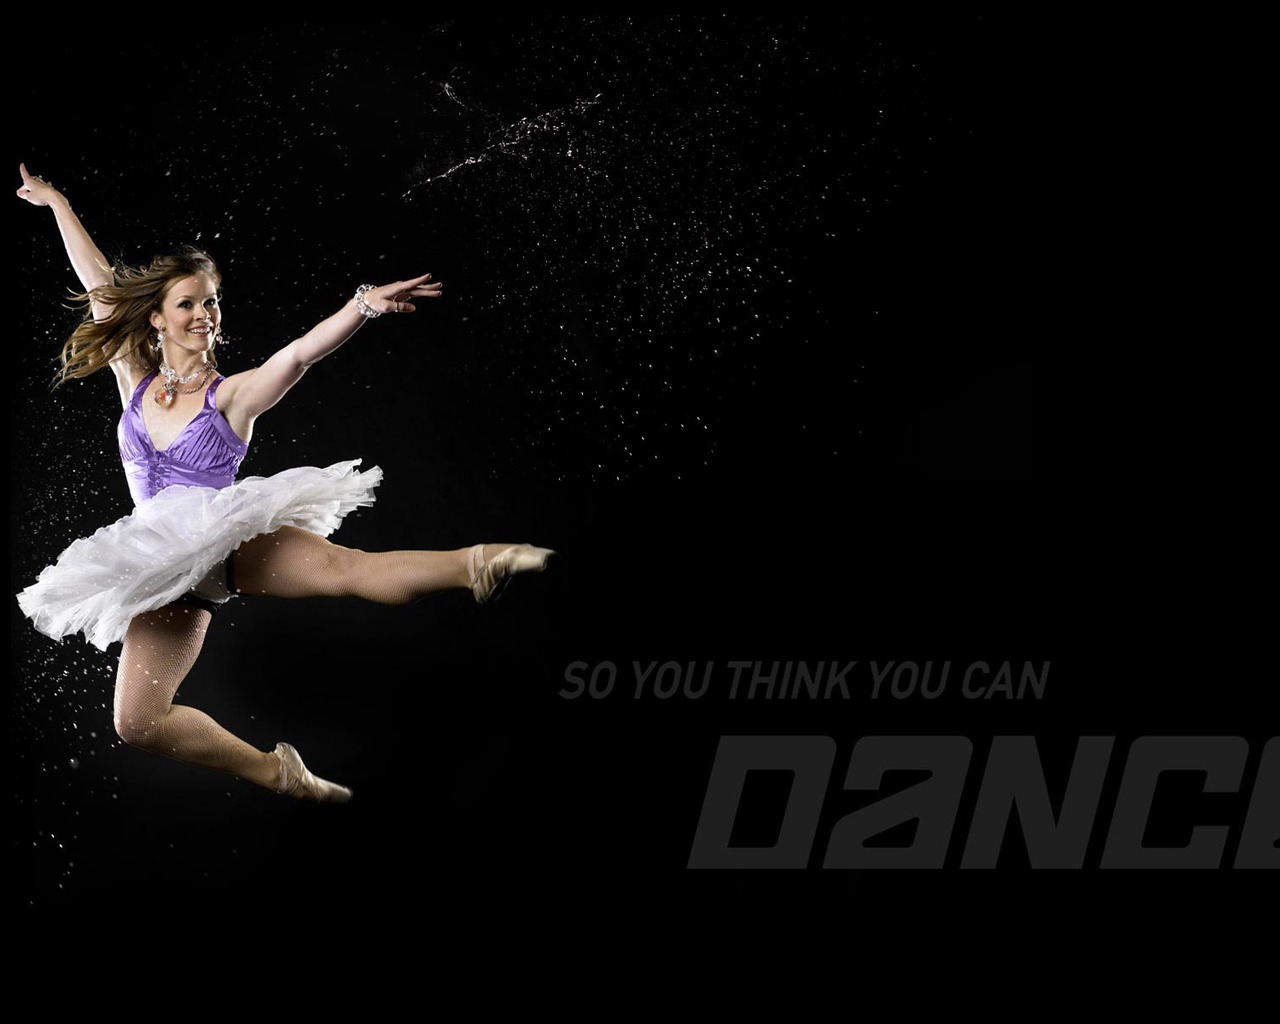 So You Think You Can Dance Wallpaper (1) #15 - 1280x1024